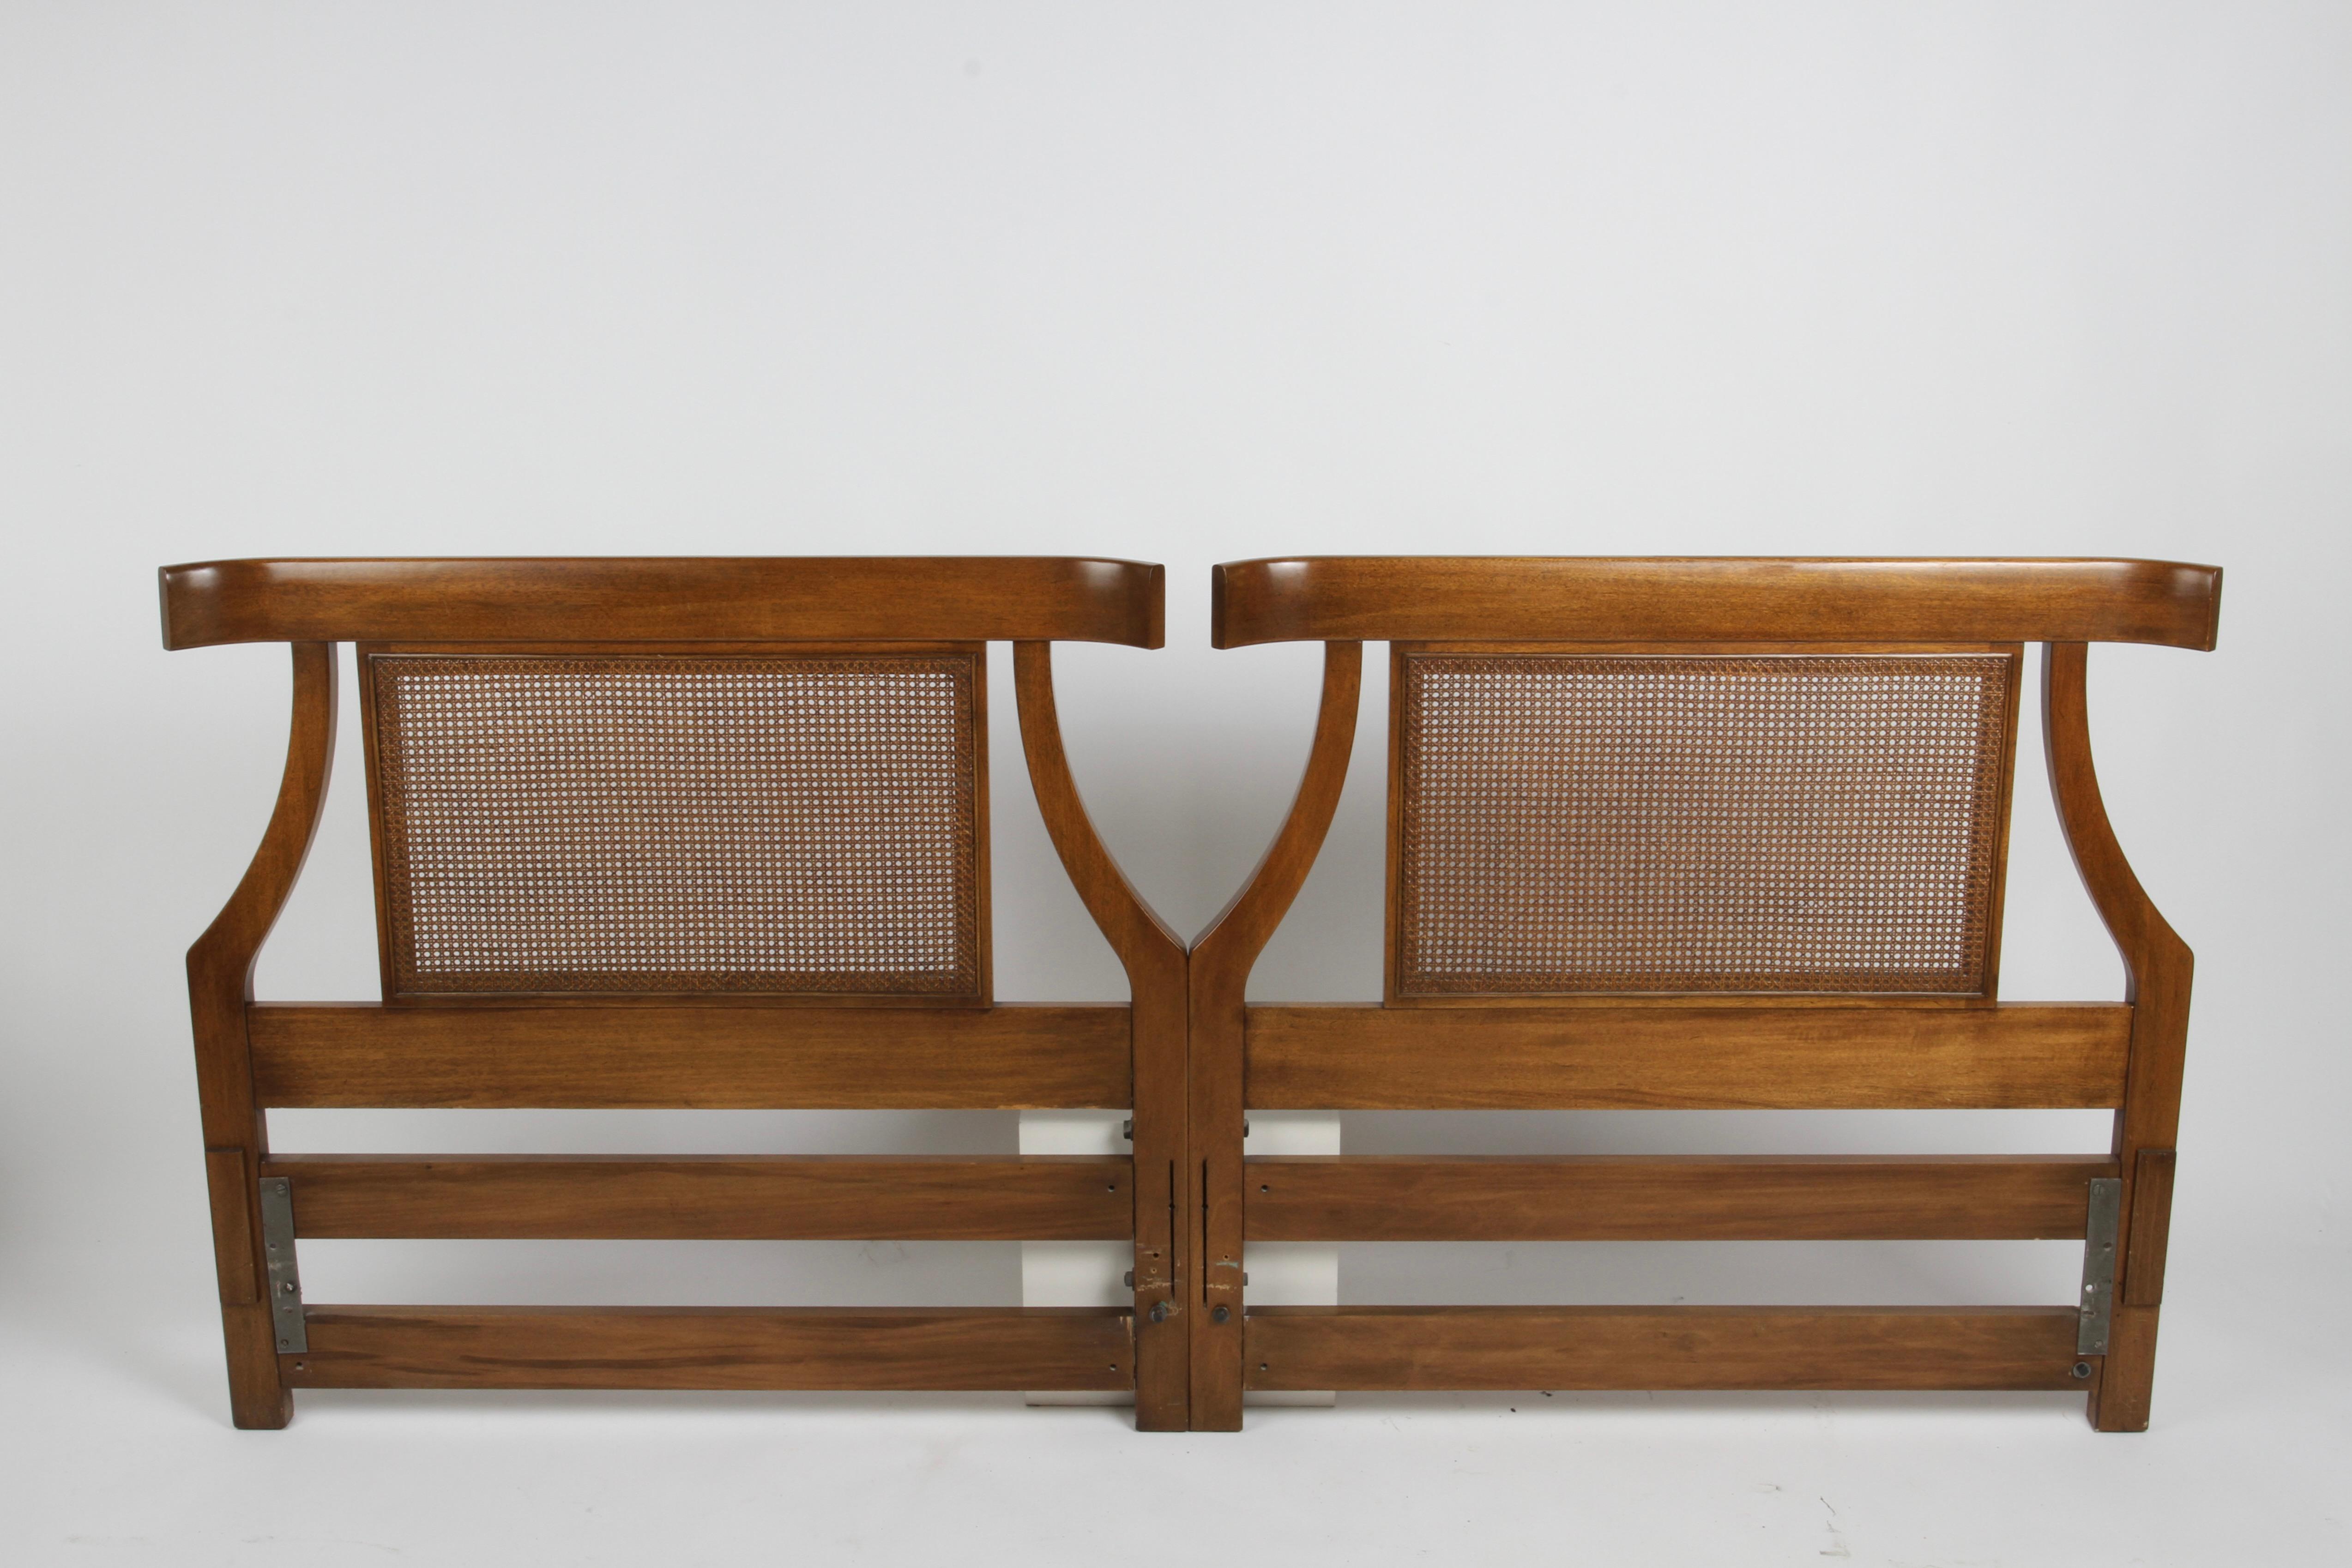 Mid-Century Modern king size headboard from the 1960's, mahogany frame with caned panels and sculptured curved top by White Furniture Company. Curved top frame very similar to Tomlinson Sophisticate chairs I've sold or even Baker Furniture chairs.